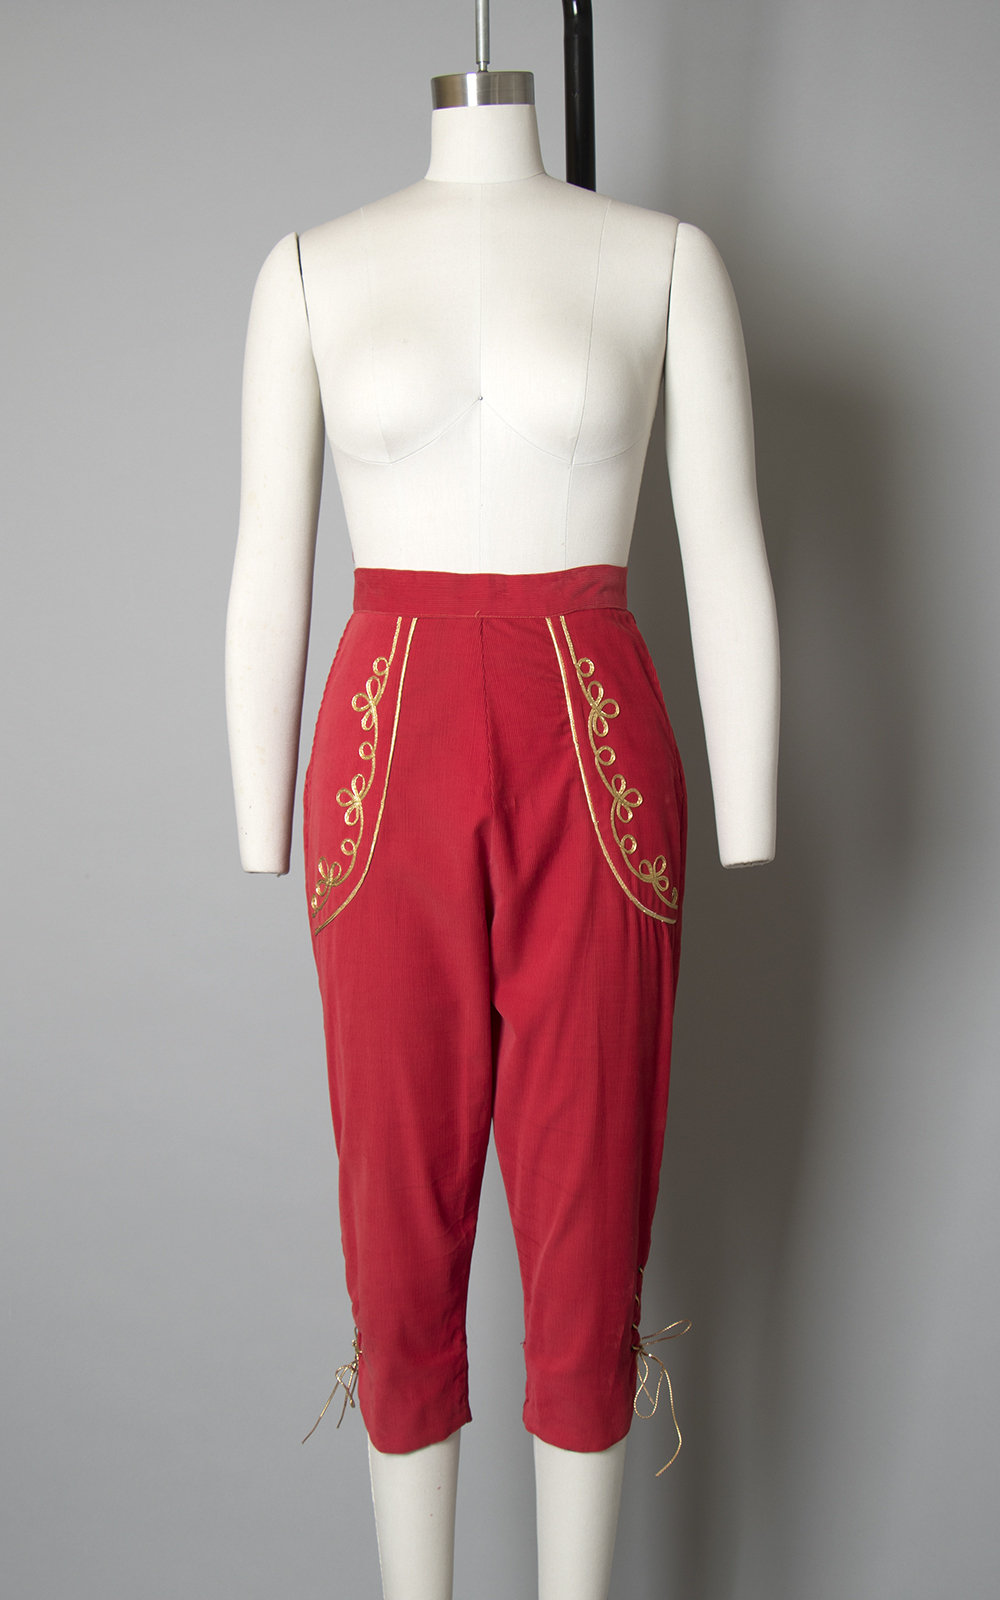 Vintage 1950s Capris | 50s Red Corduroy Gold Lace Up Pedal Pushers Matador High Waisted Pants (x-small/small)